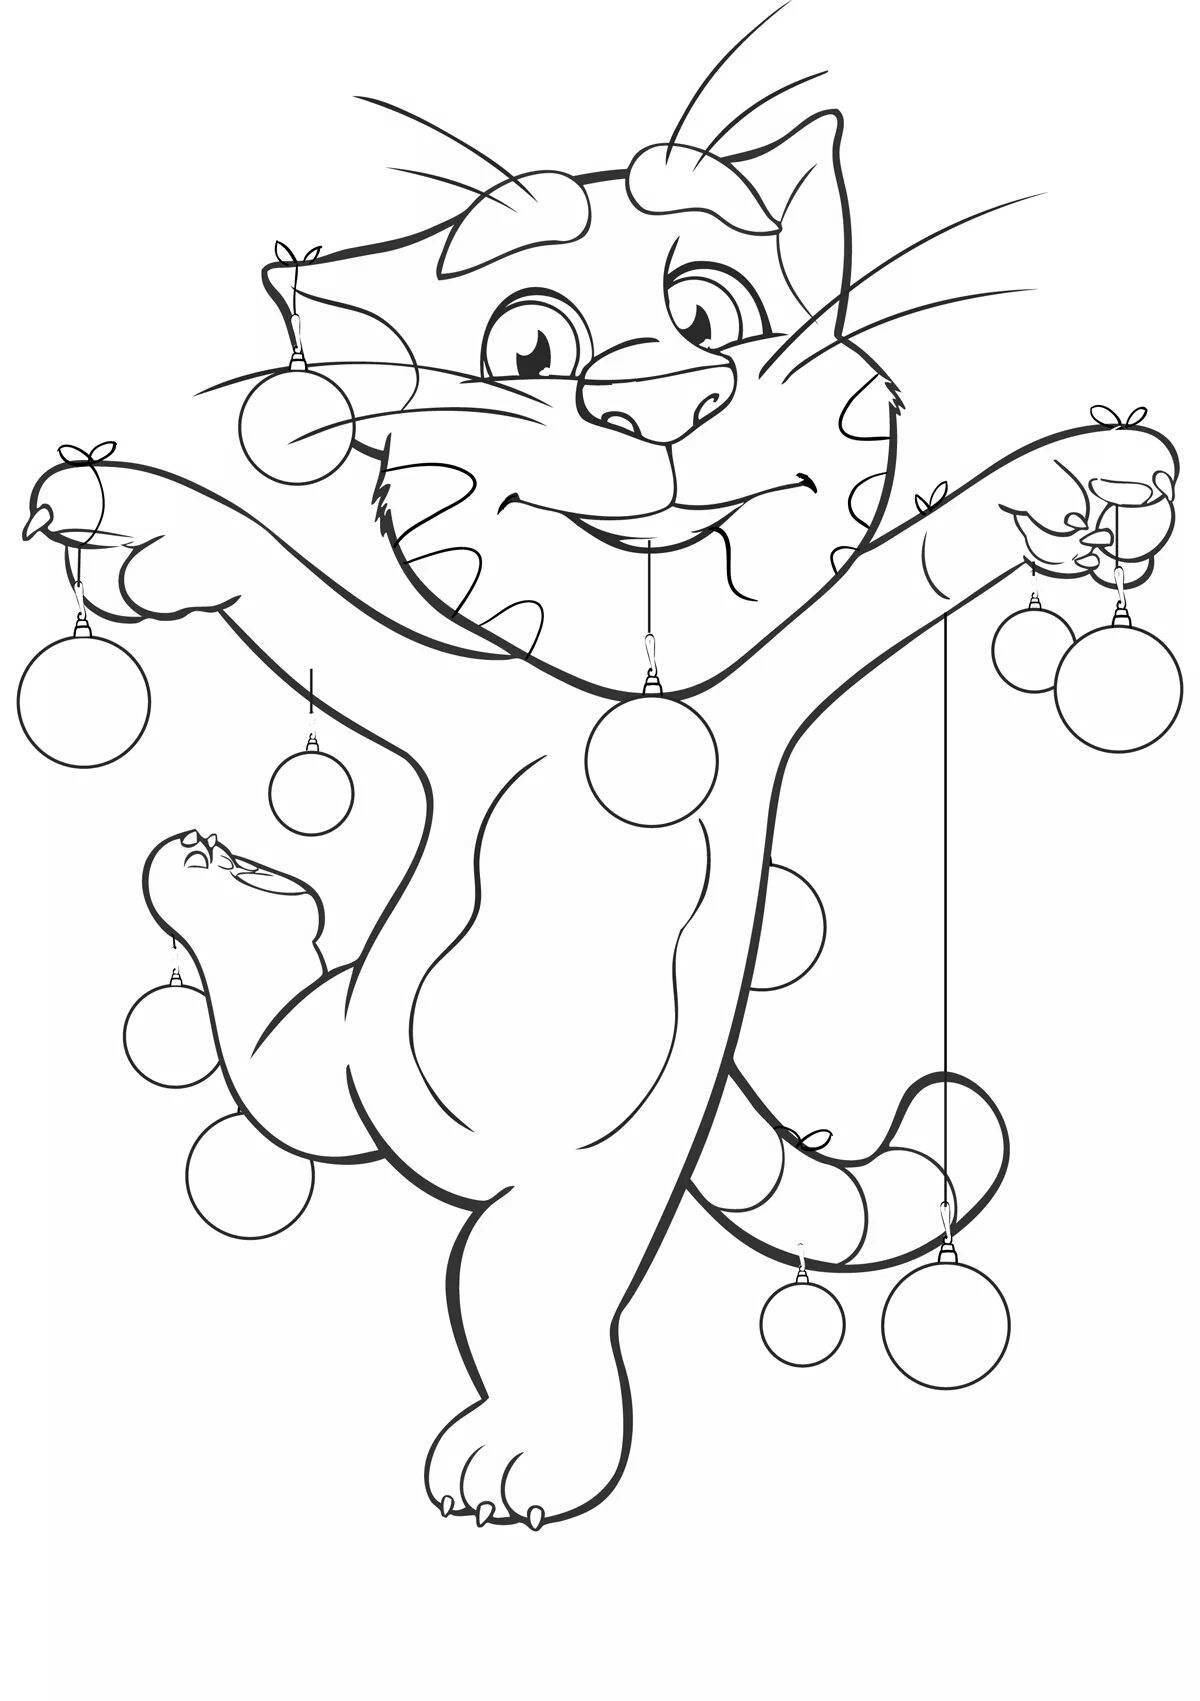 Angela cat funny coloring book